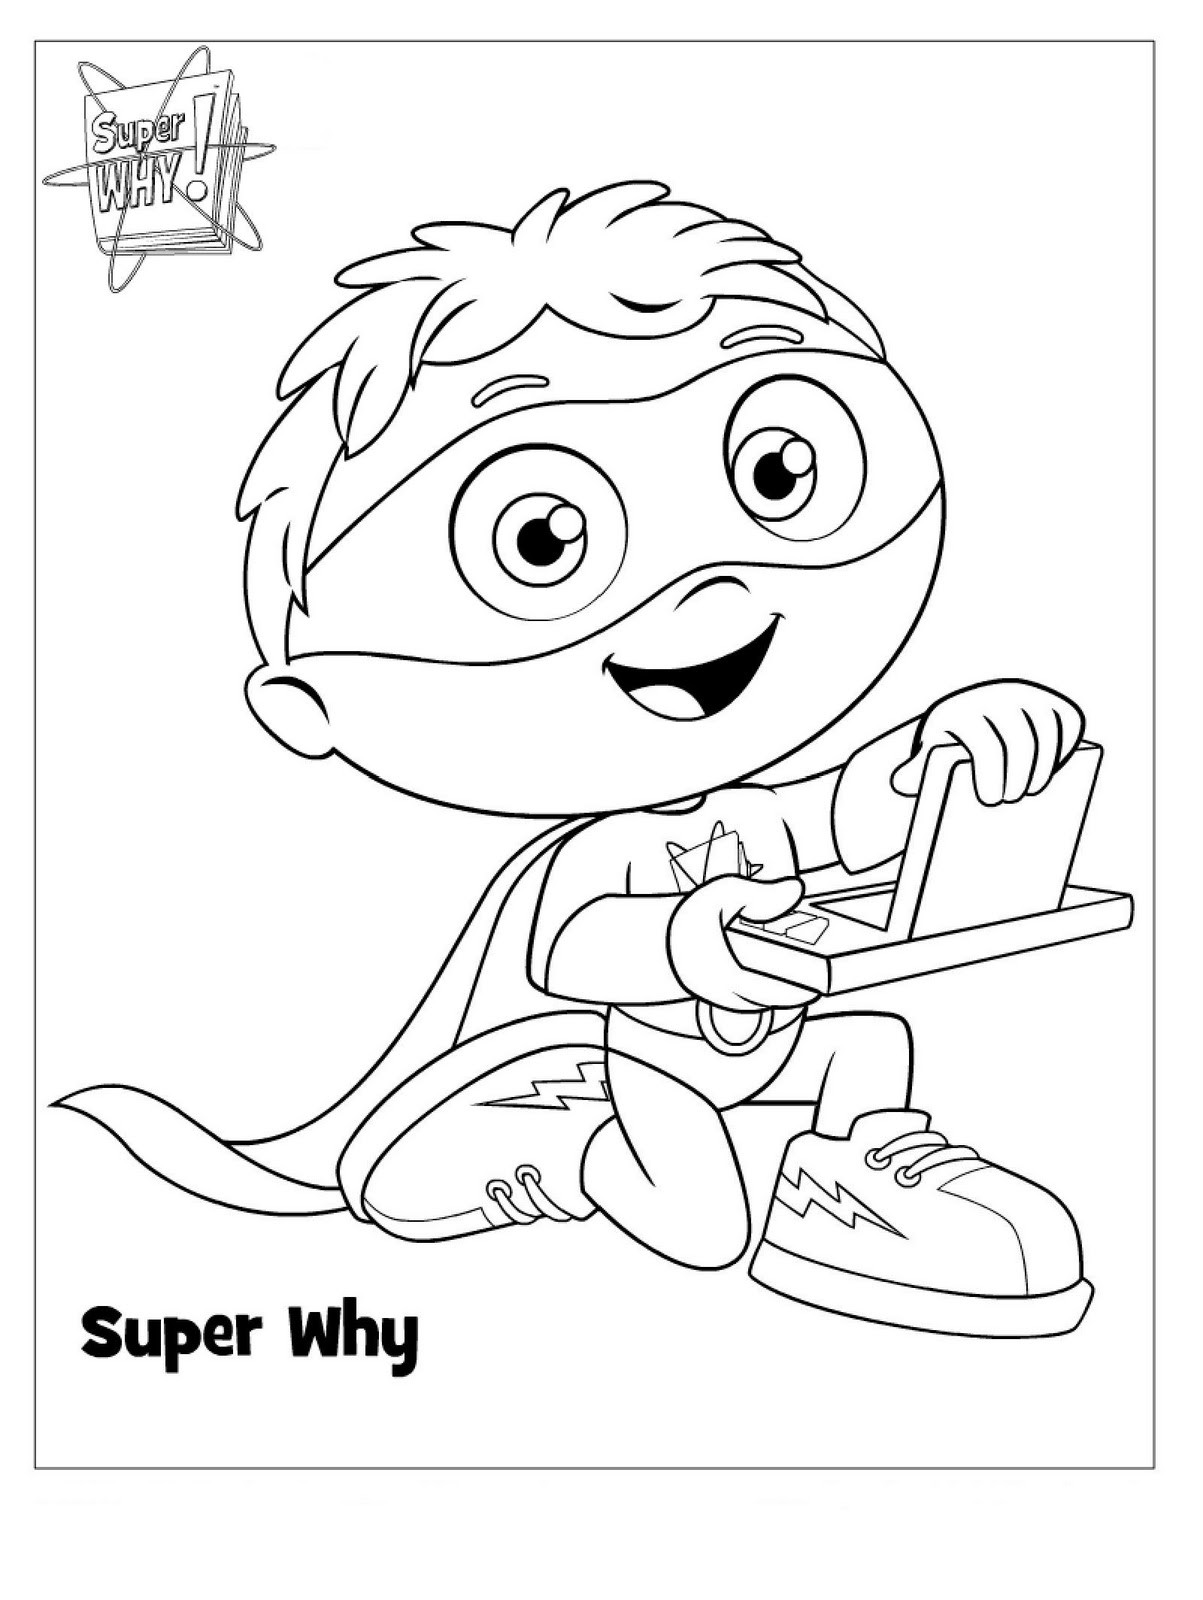 Kid Coloring Books
 Super Why Coloring Pages Best Coloring Pages For Kids